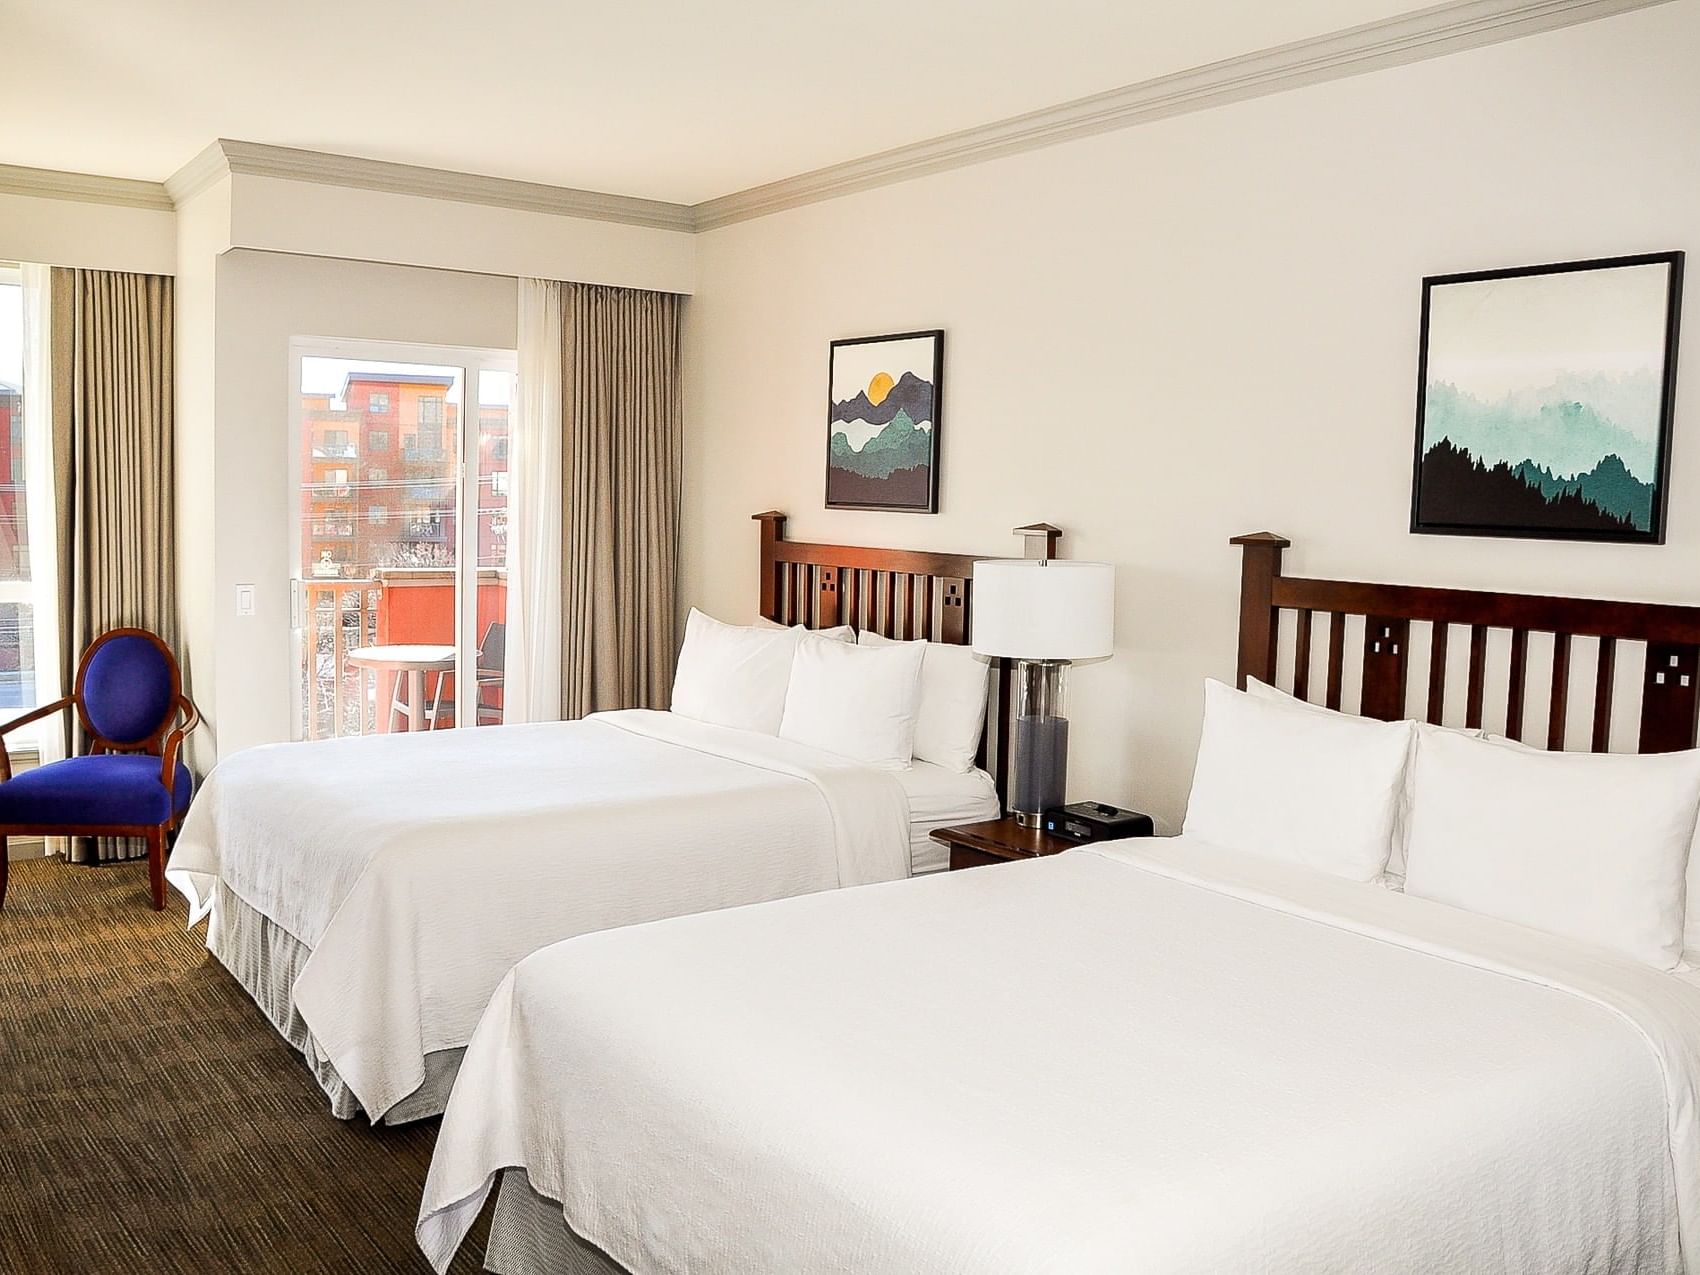 Deluxe Guest Room with two beds at Manteo Resort